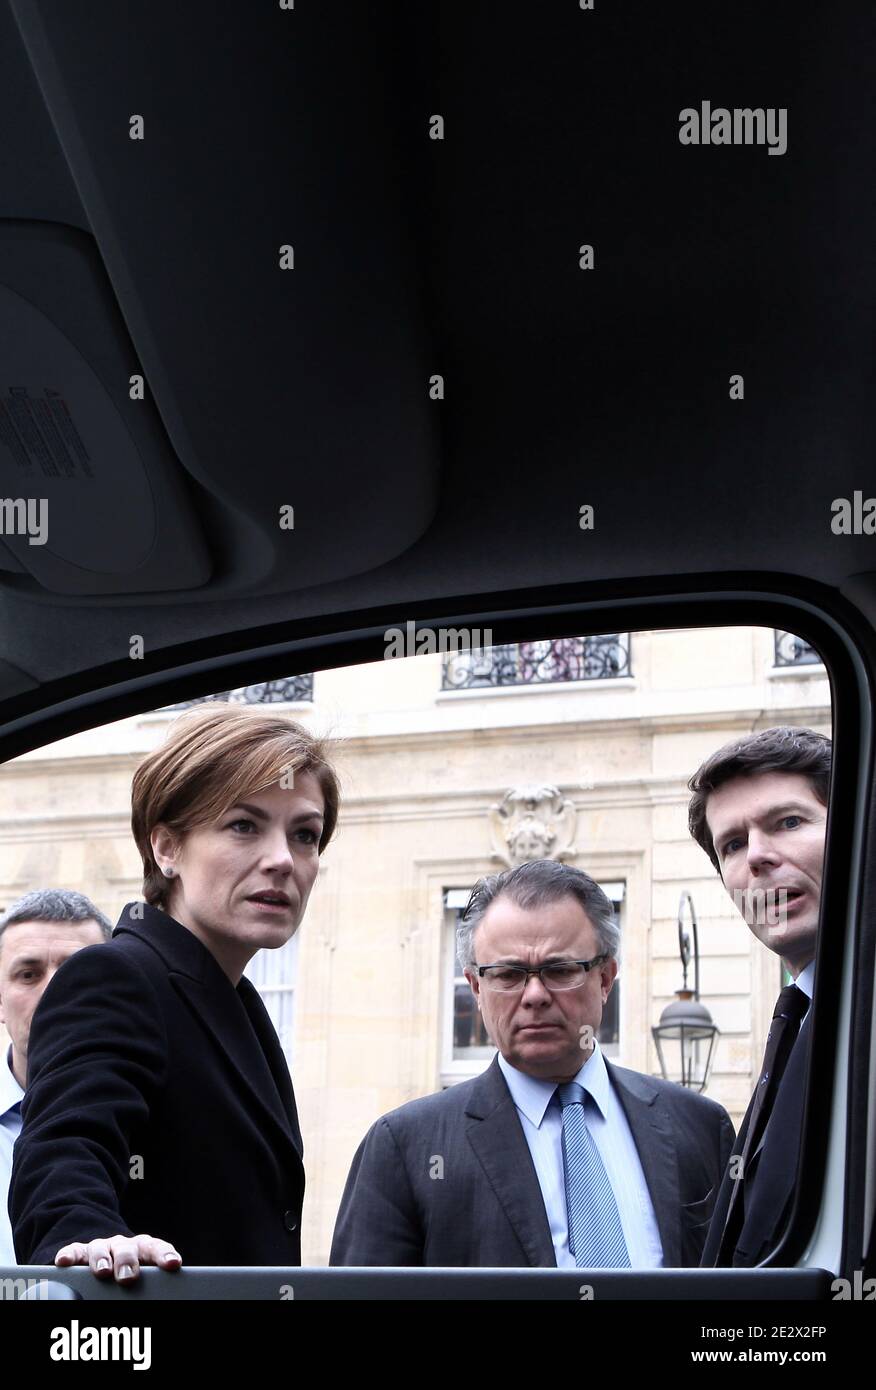 French Junior ecology minister Chantal Jouanno is pictured near the Peugeot iOn electric car in the courtyard of the Ecology ministry after a meeting focus on electric and hybrid cars development in Paris, France on April 13th, 2010. Photo by Stephane Lemouton/ABACAPRESS.COM Stock Photo